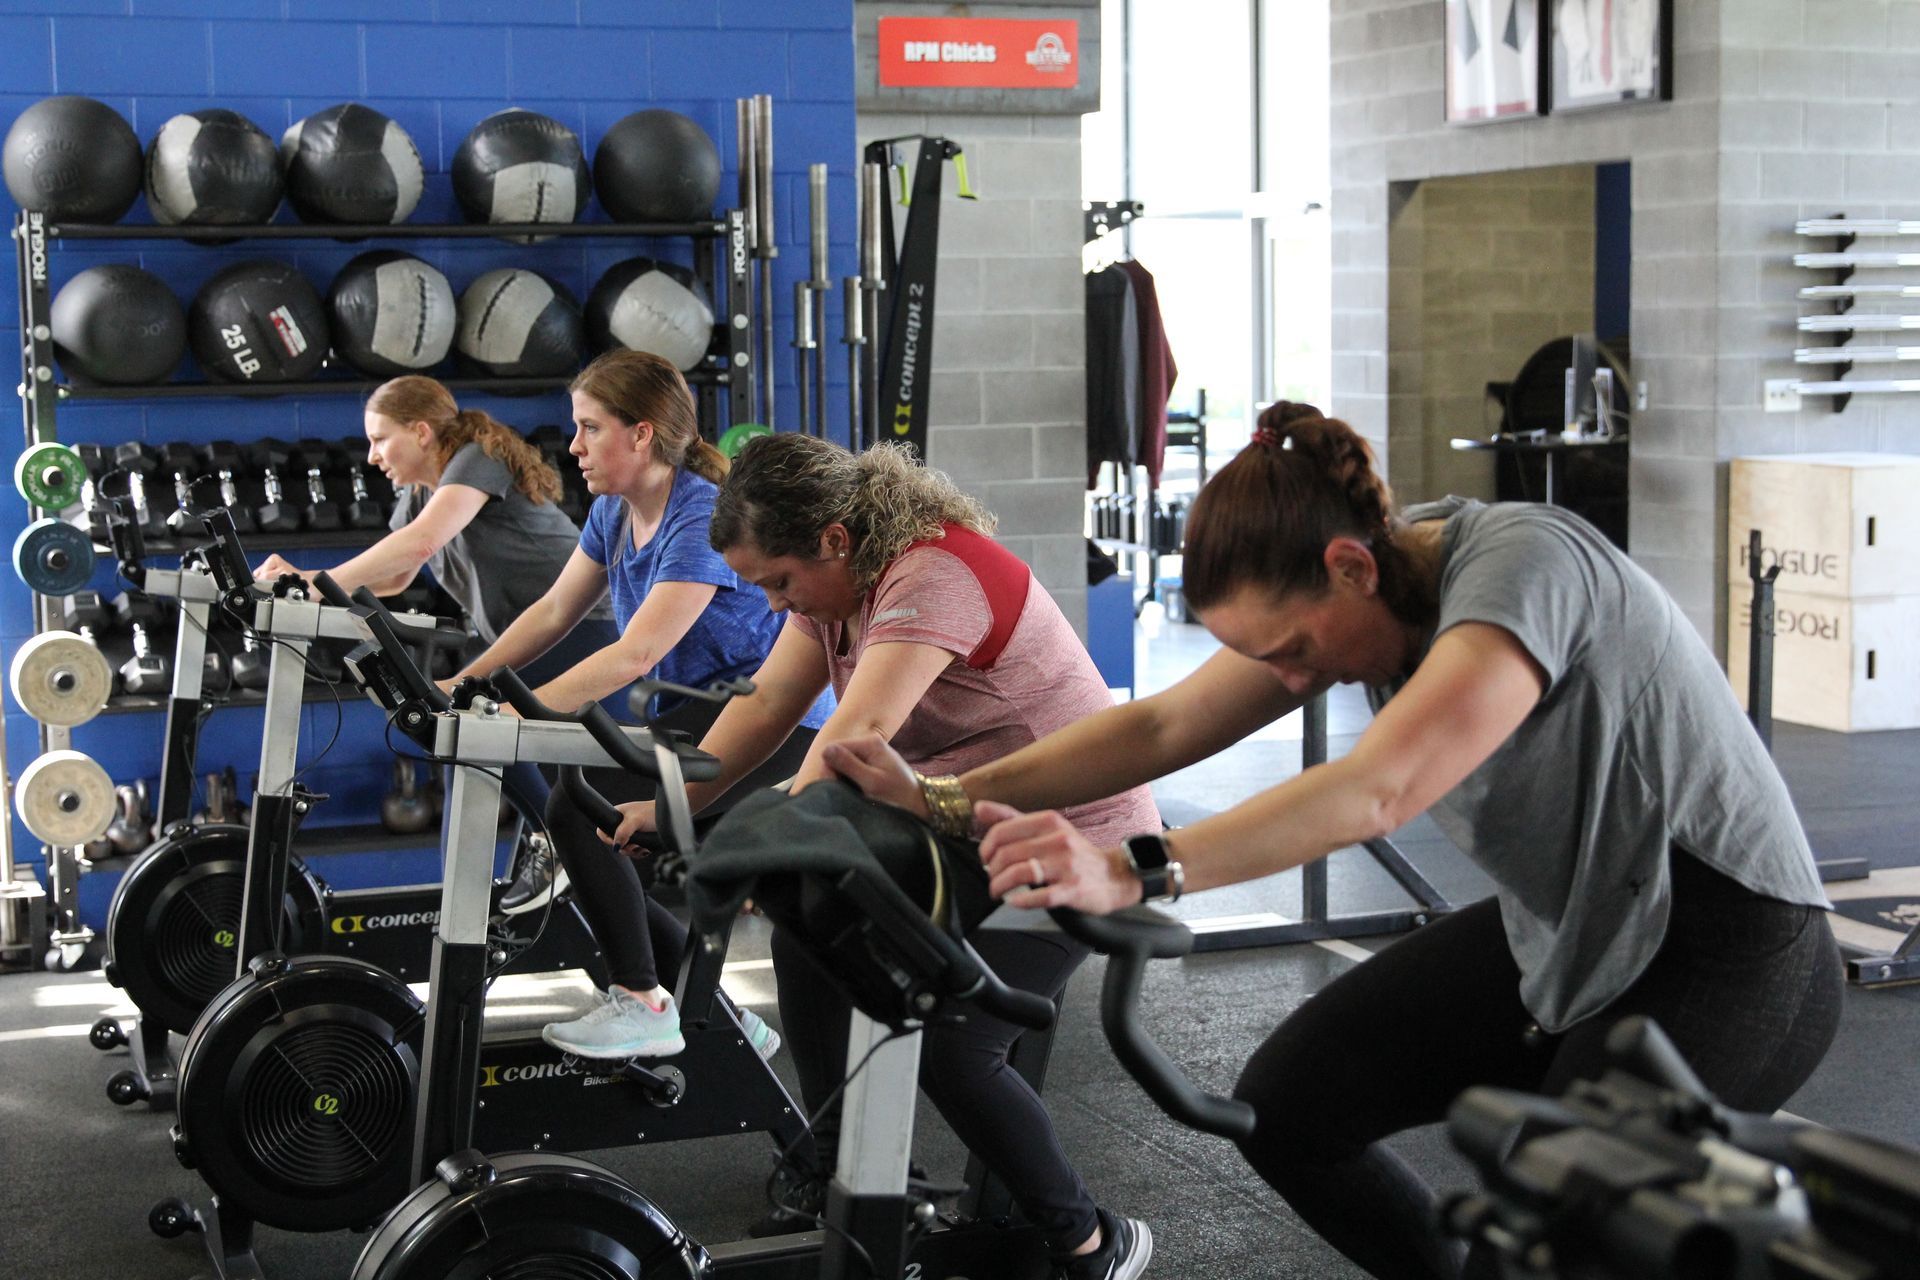 A group of women are riding exercise bikes in a gym.